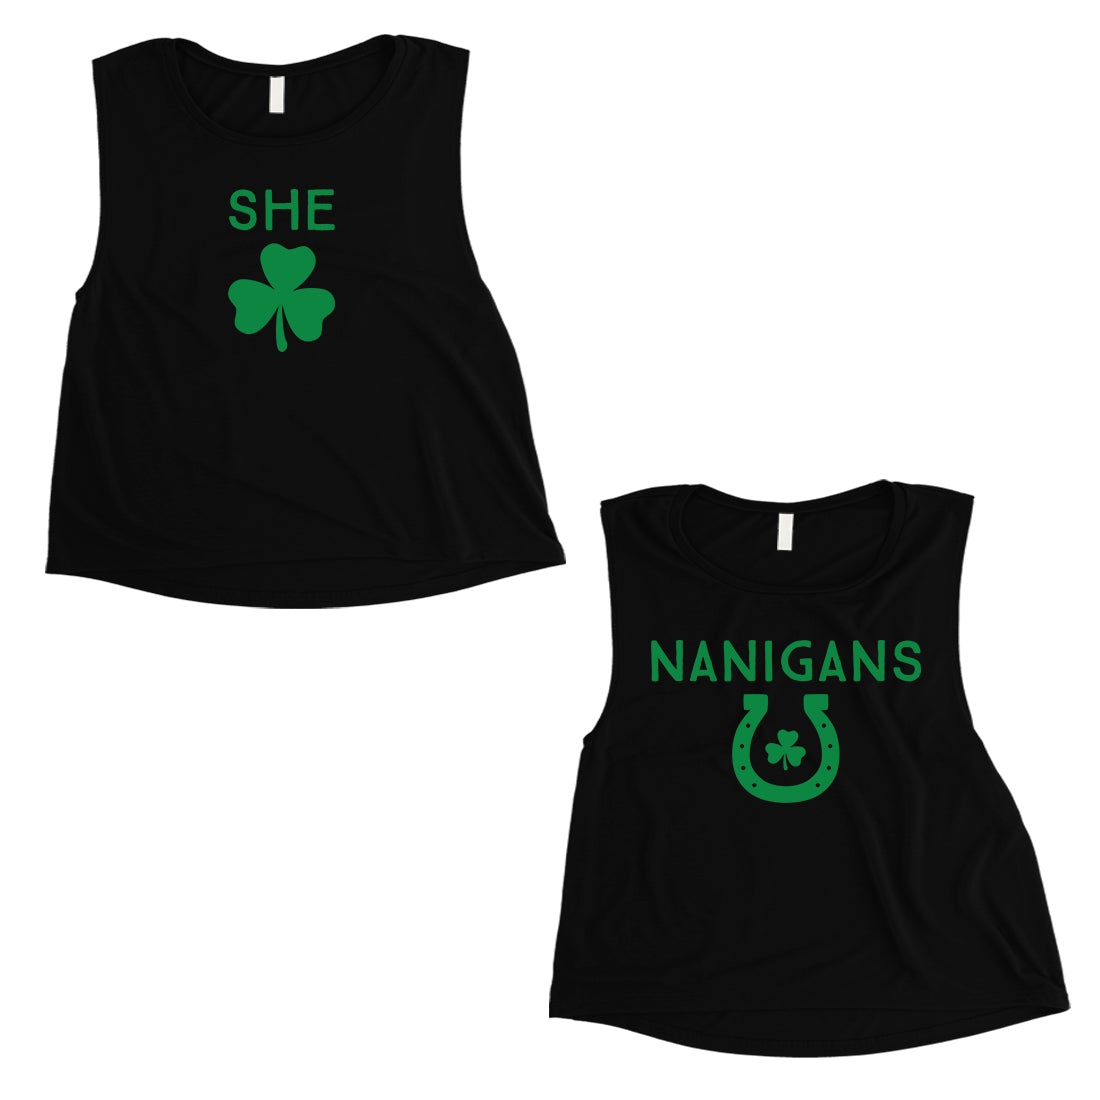 Shenanigans Funny St Patrick's Day Matching Crop Tank Tops BFF Gift Black